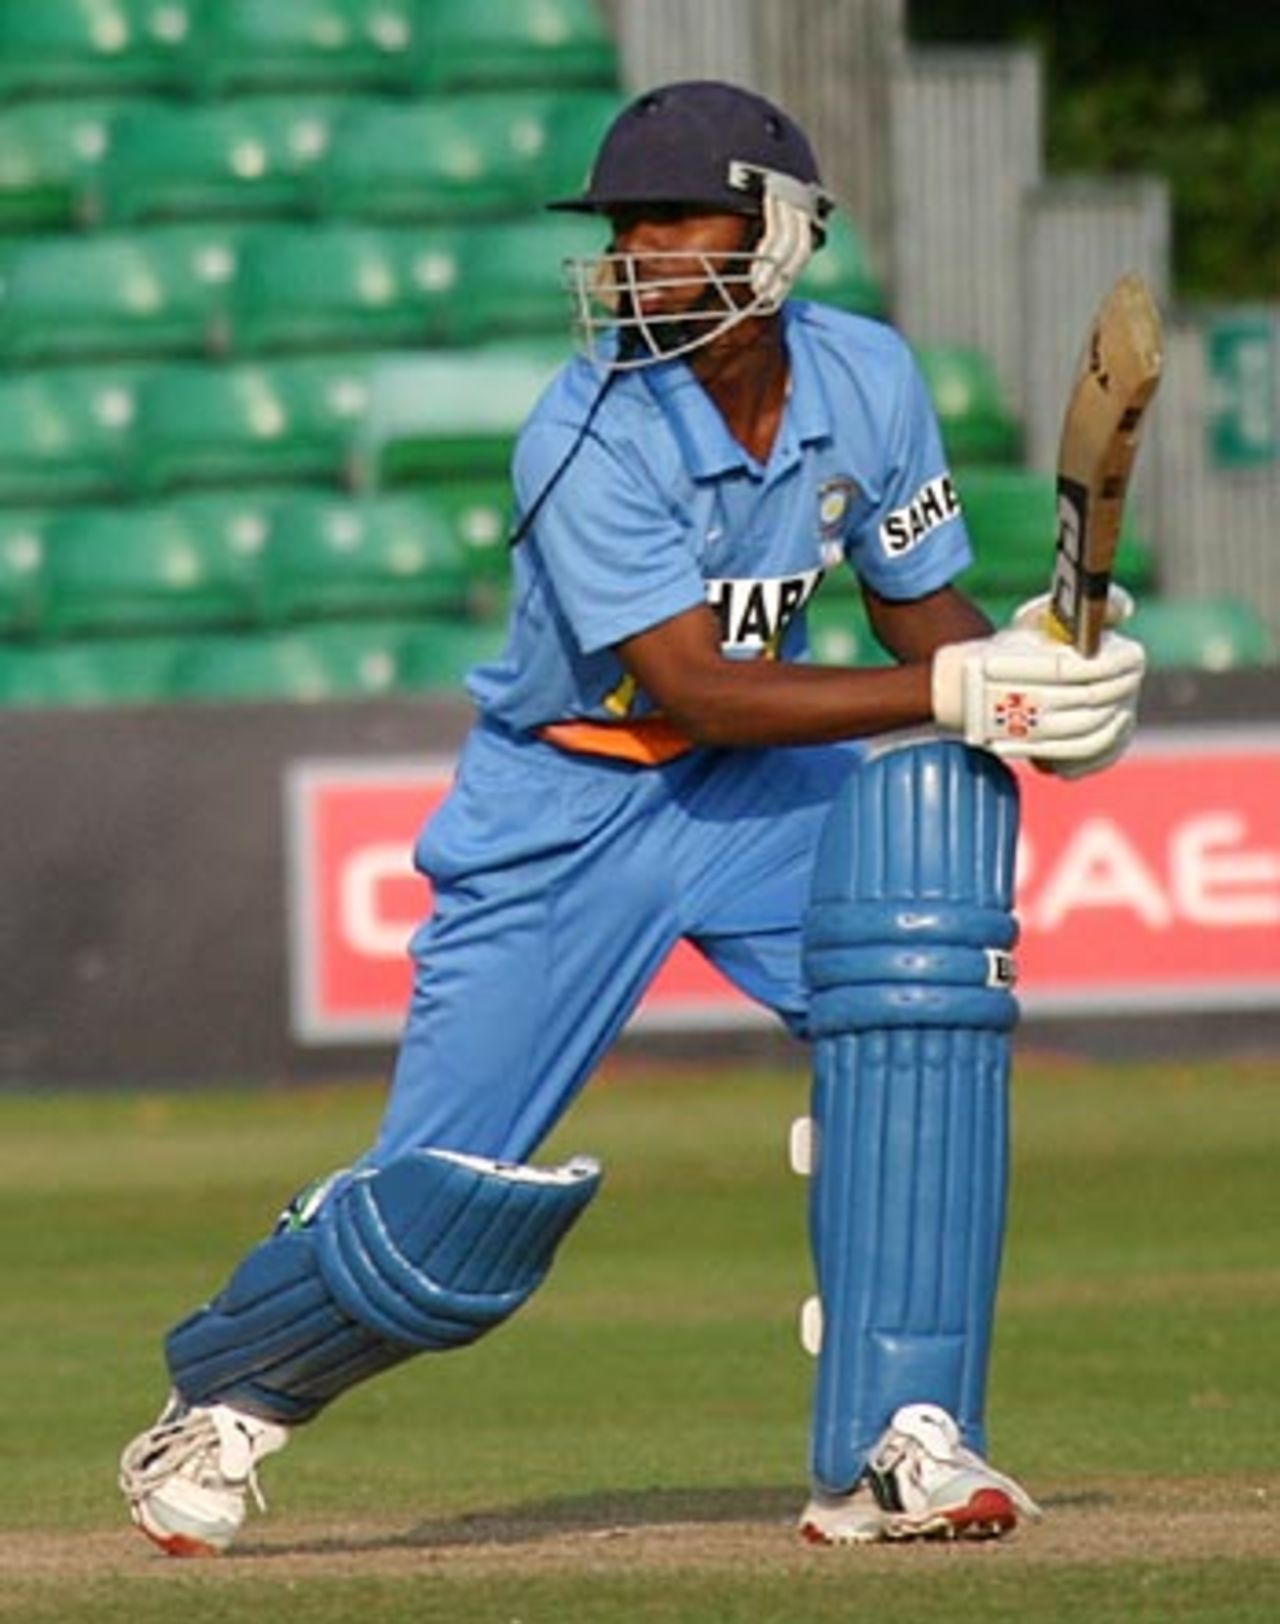 Bodapati Sumanth on his way to 97 not out and the Man-of-the-Match award, England U-19 v India U-19, 3rd ODI, Cardiff, July 21, 2006